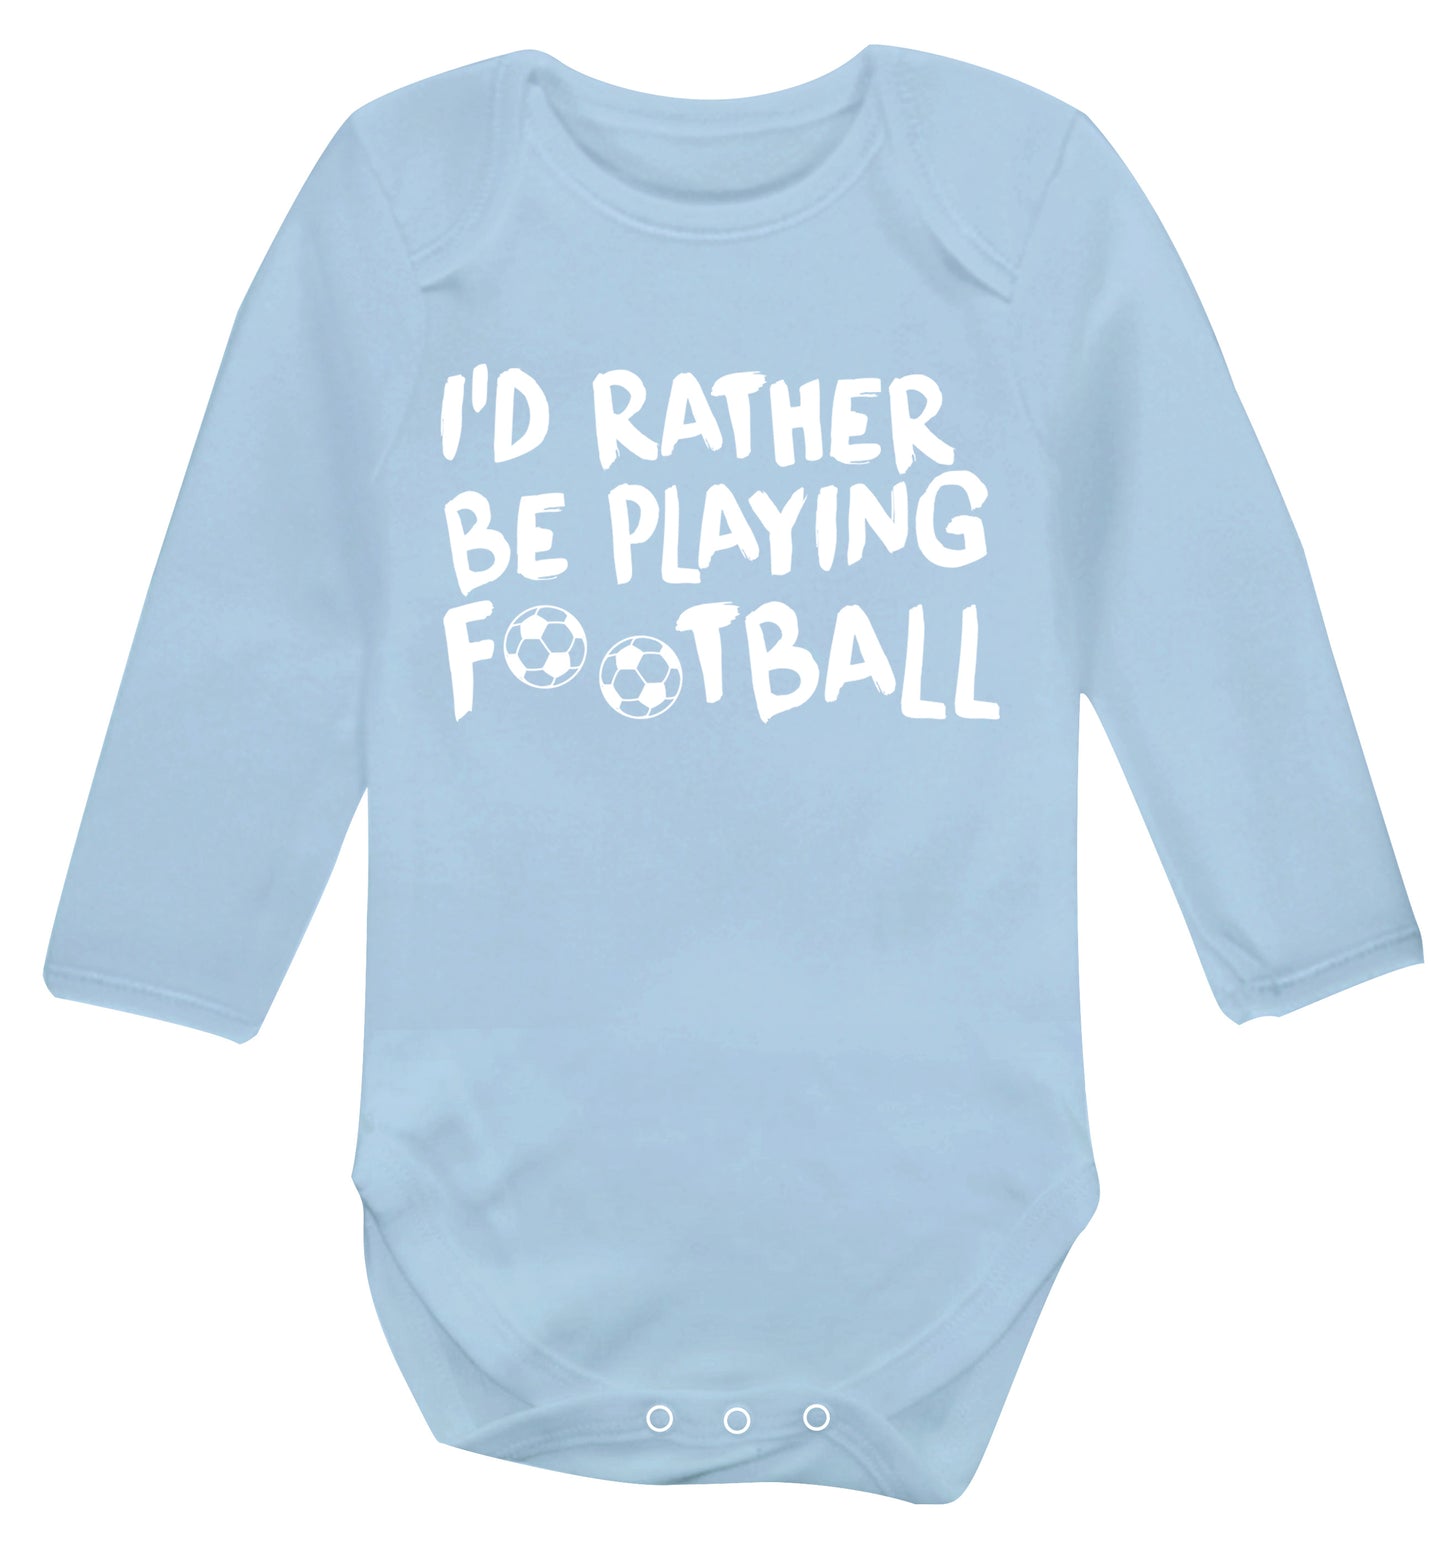 I'd rather be playing football Baby Vest long sleeved pale blue 6-12 months